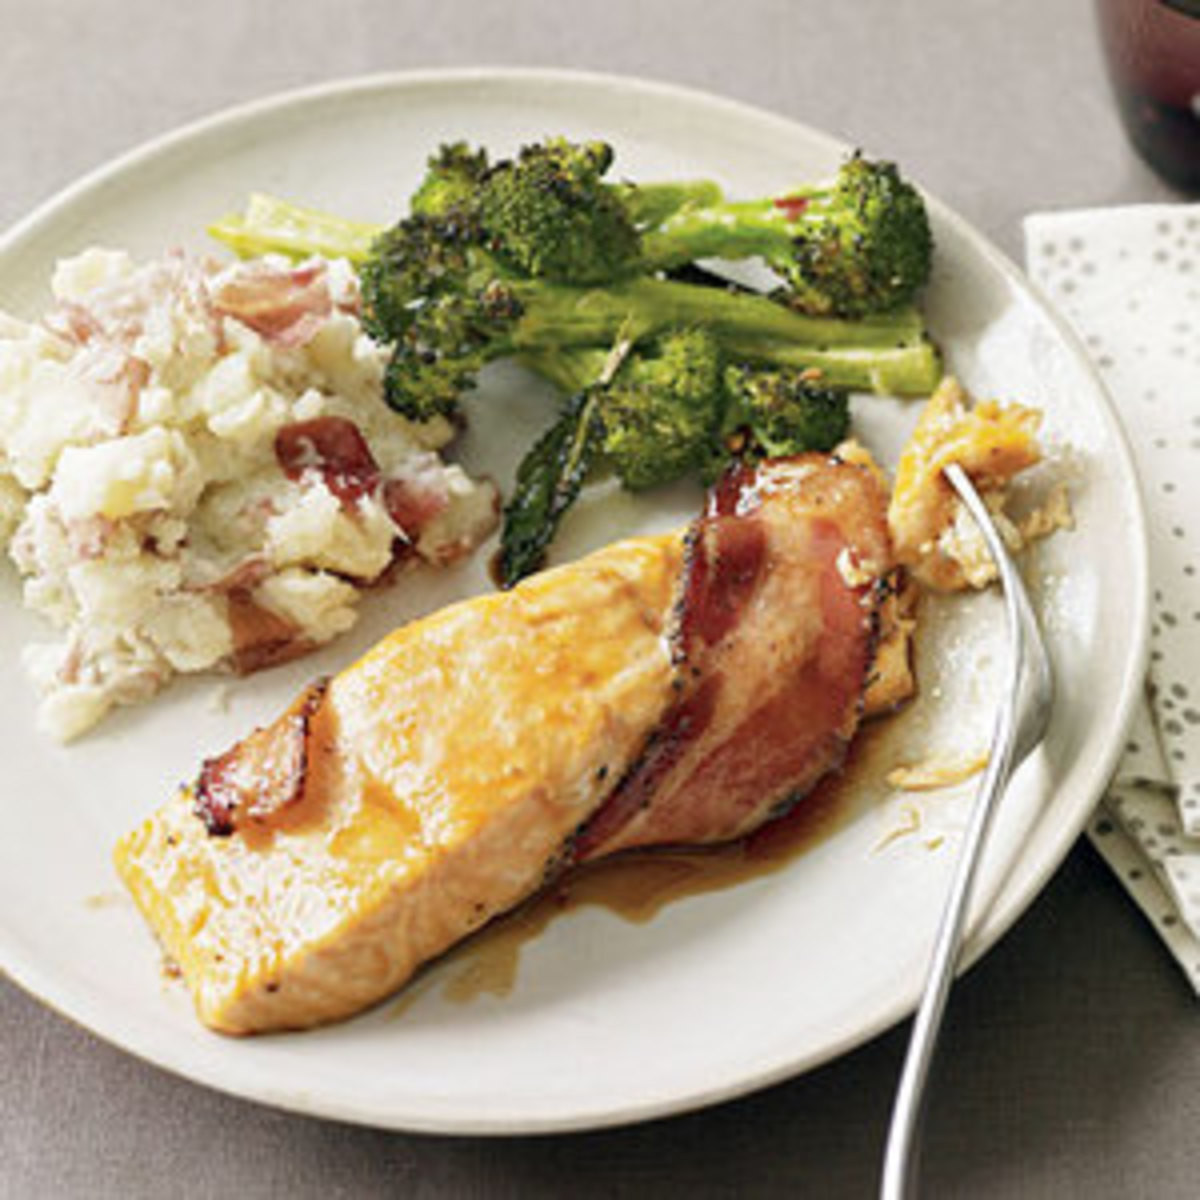 Salmon And Mashed Potatoes
 Bacon Wrapped Salmon with Broccoli and Mashed Potatoes